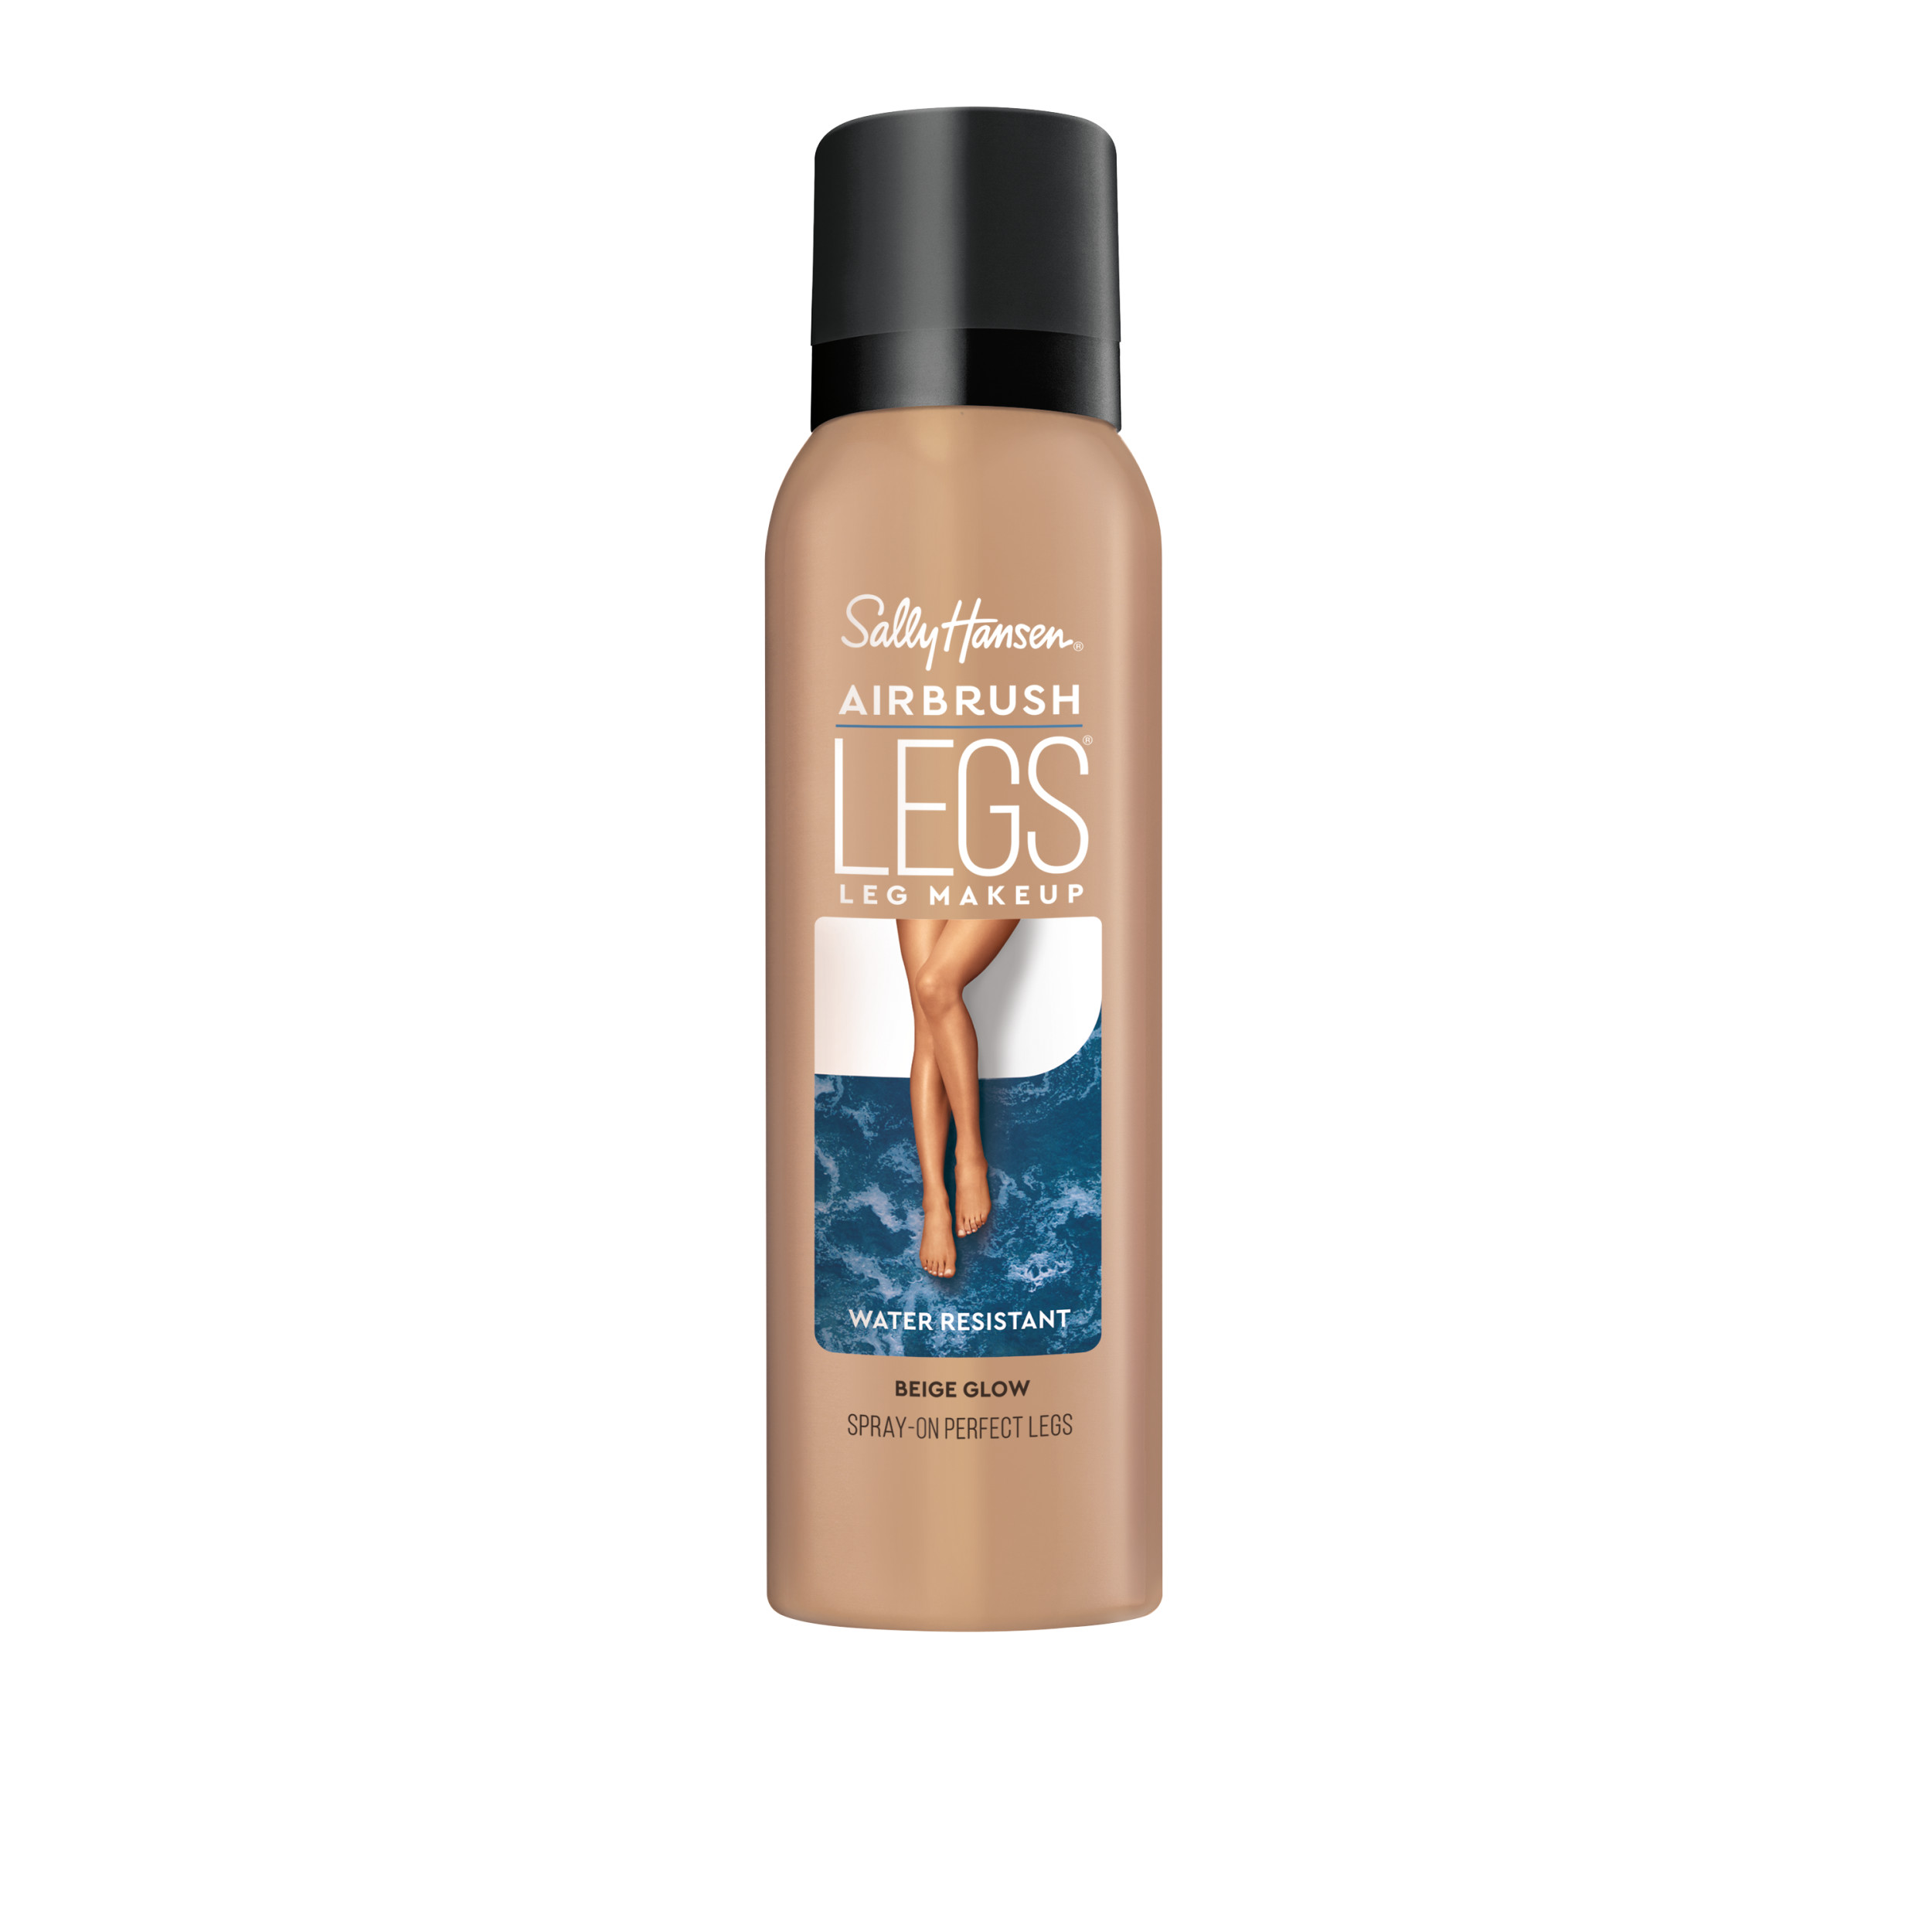 Sally Hansen Airbrush Legs Makeup, Beige Glow, 4.4 oz Spray, Water and Transfer-Resistant - image 1 of 12